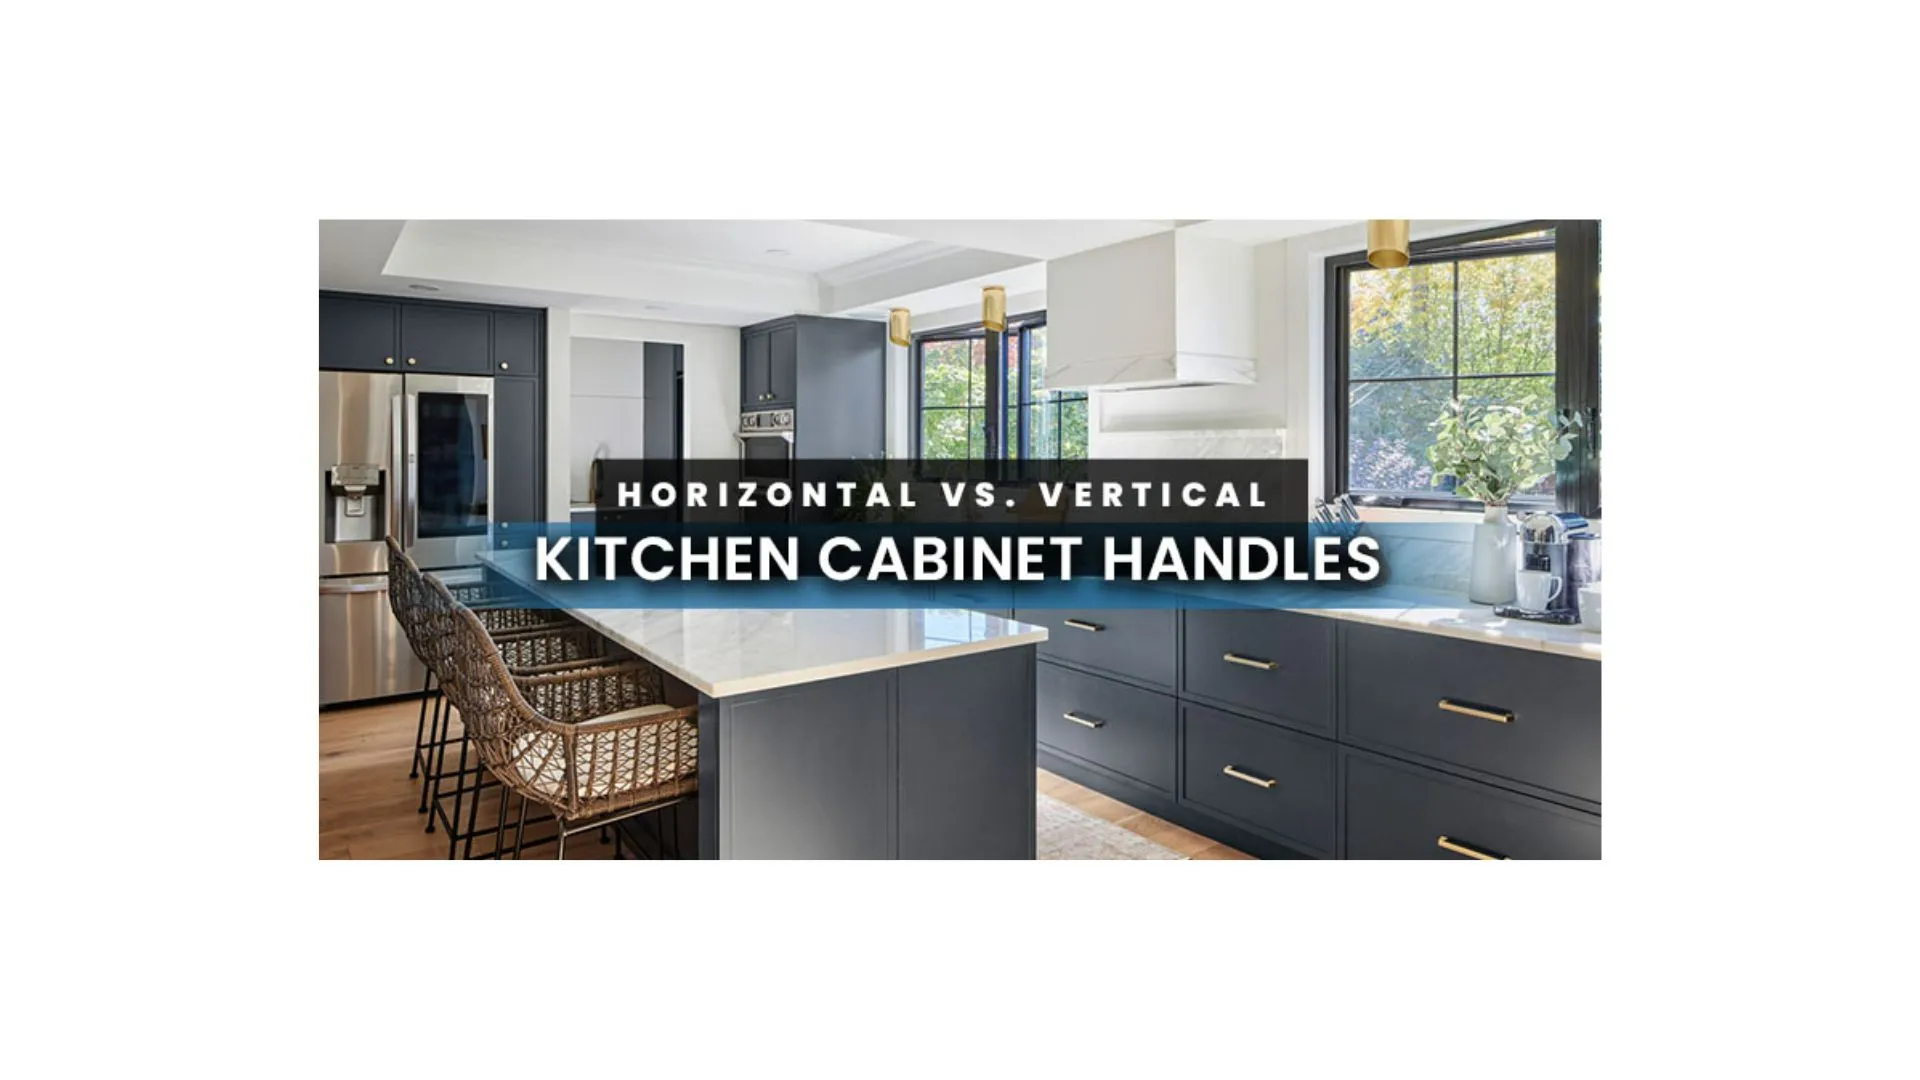 How Should Cabinet Hardware Be Mounted on Kitchen Cabinets? Vertically 